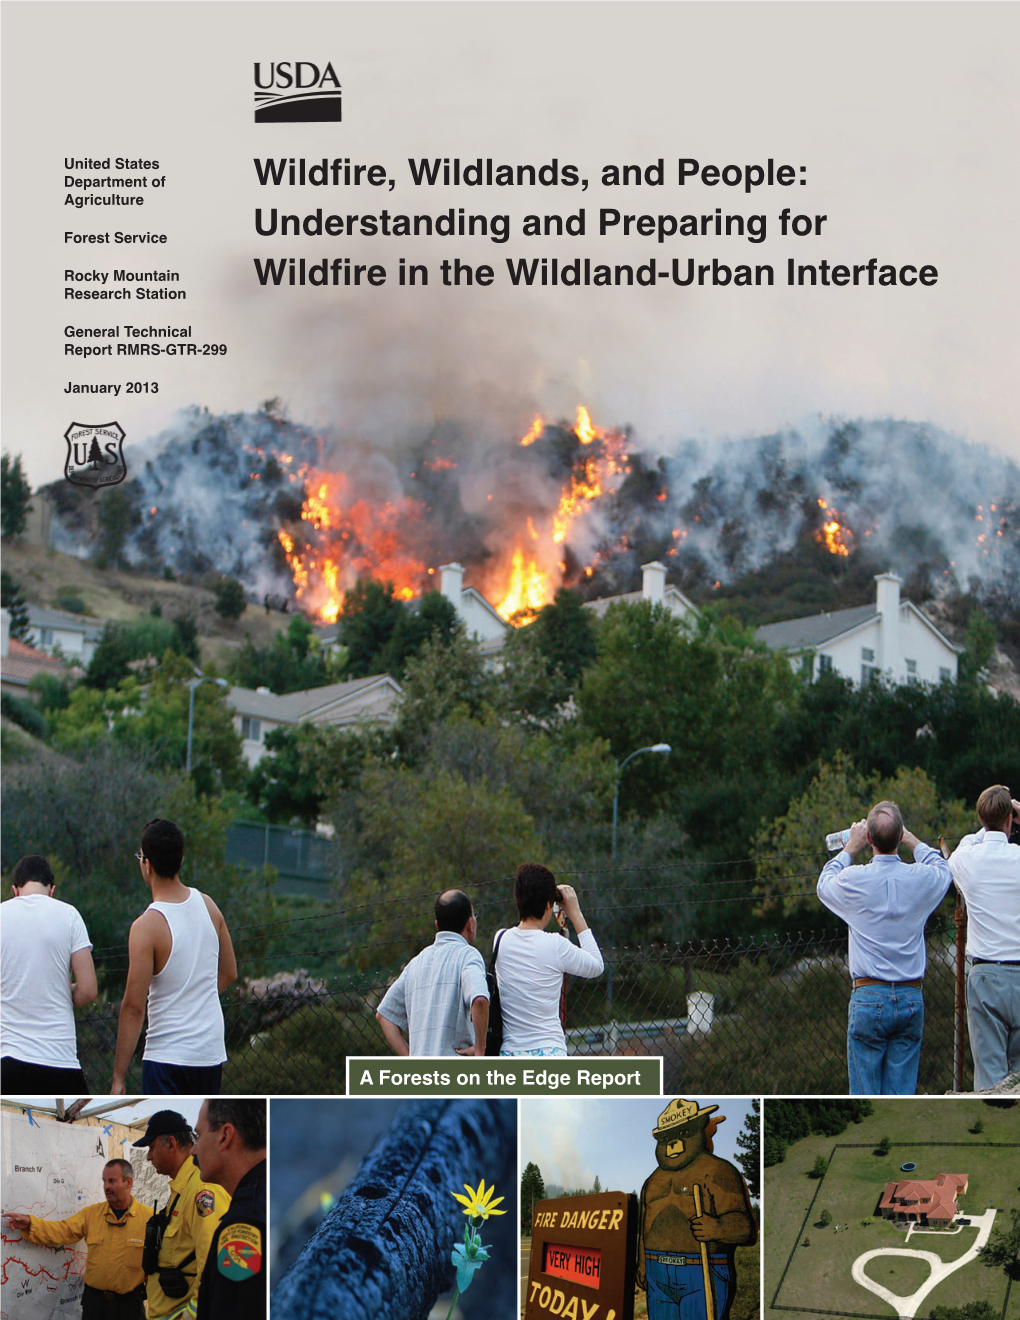 Understanding and Preparing for Wildfire in the Wildland-Urban Interface—A Forests on the Edge Report